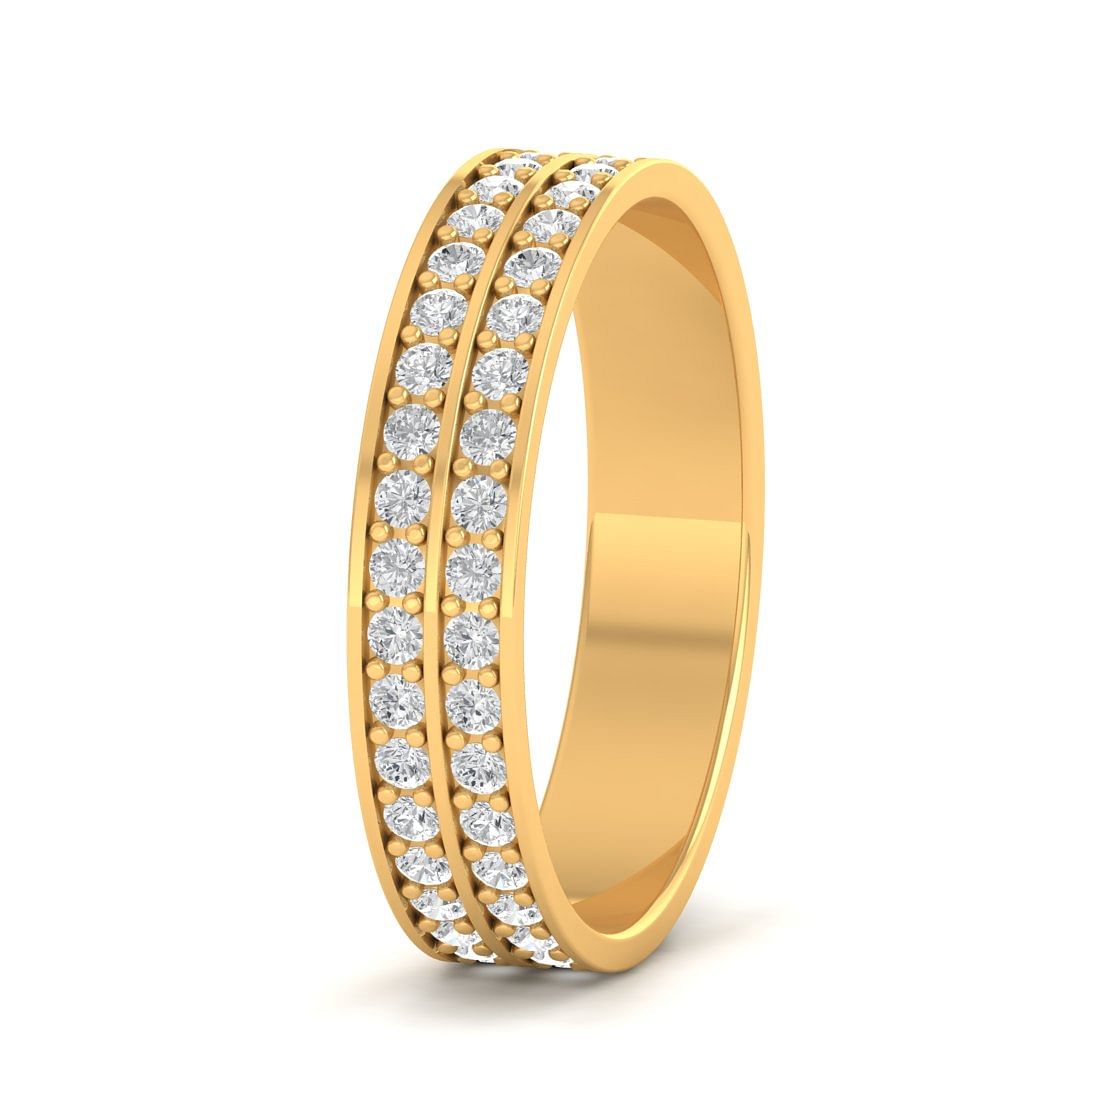 Special Wedding Yellow Gold Ring For Her